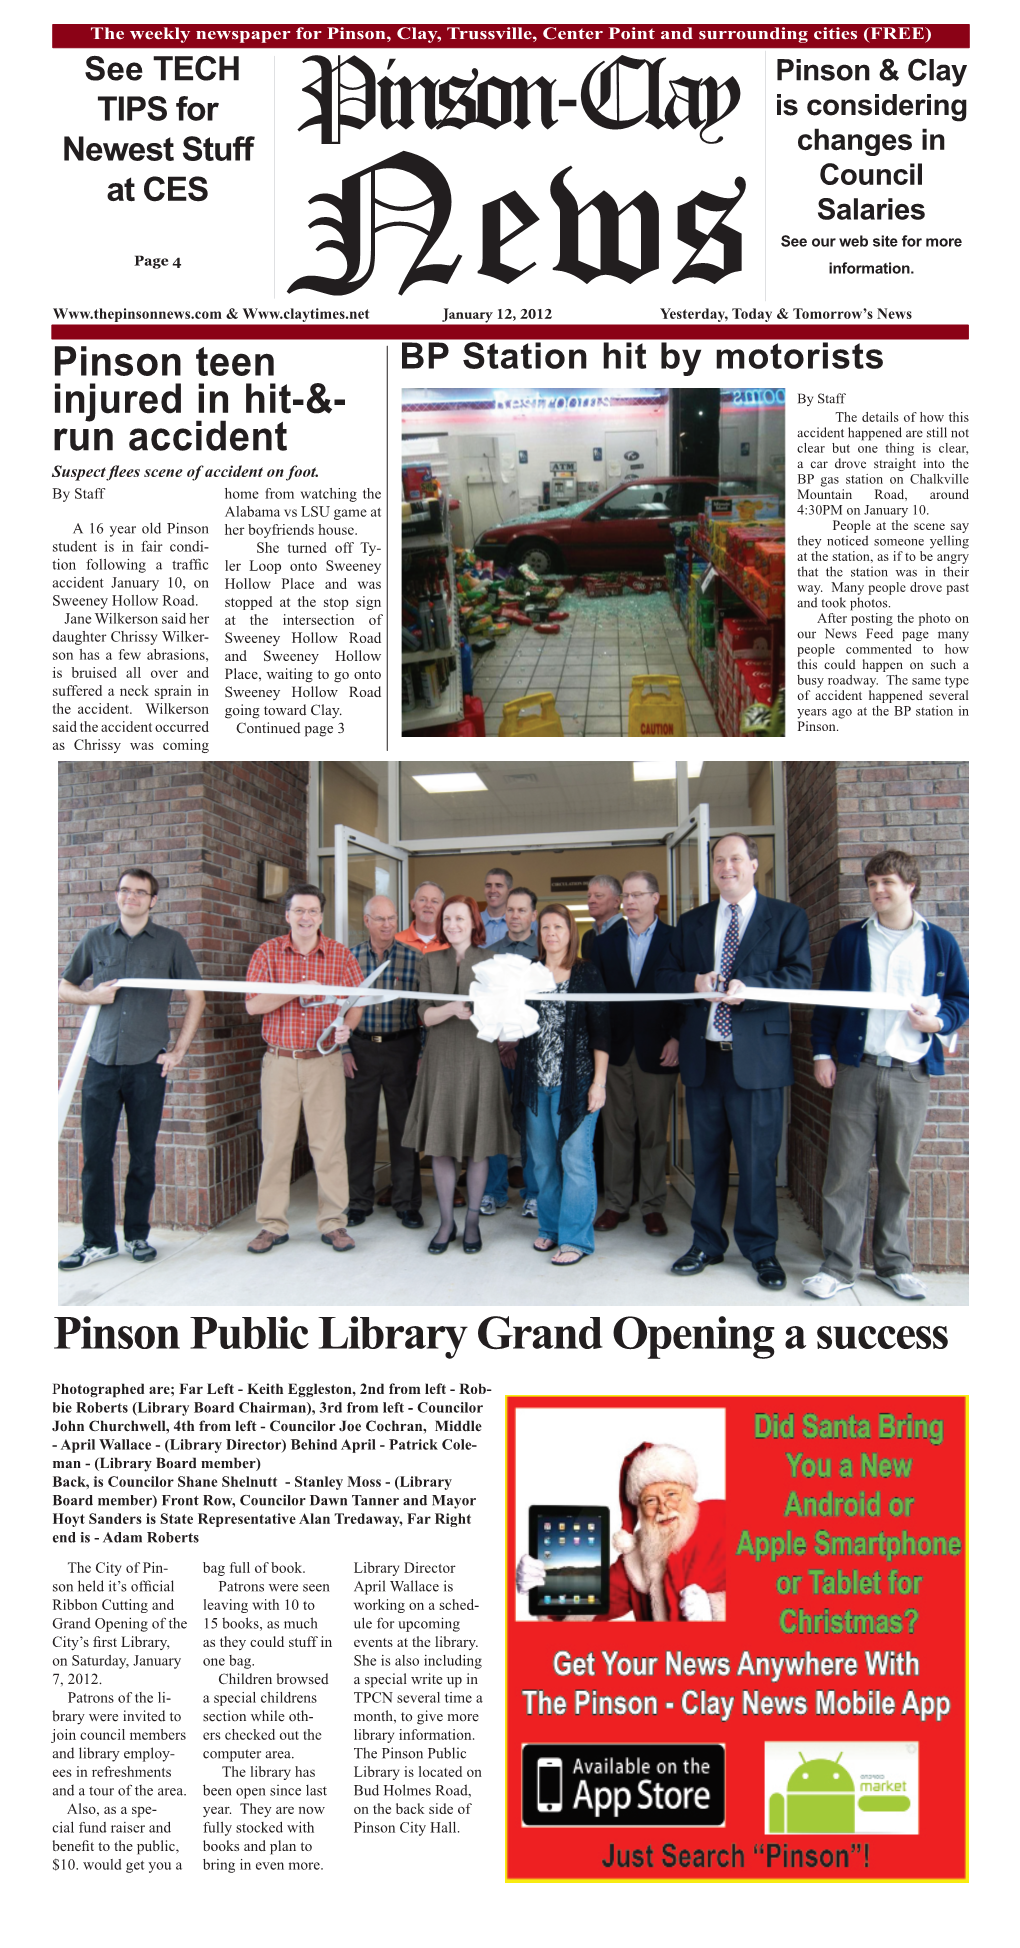 Pinson Public Library Grand Opening a Success